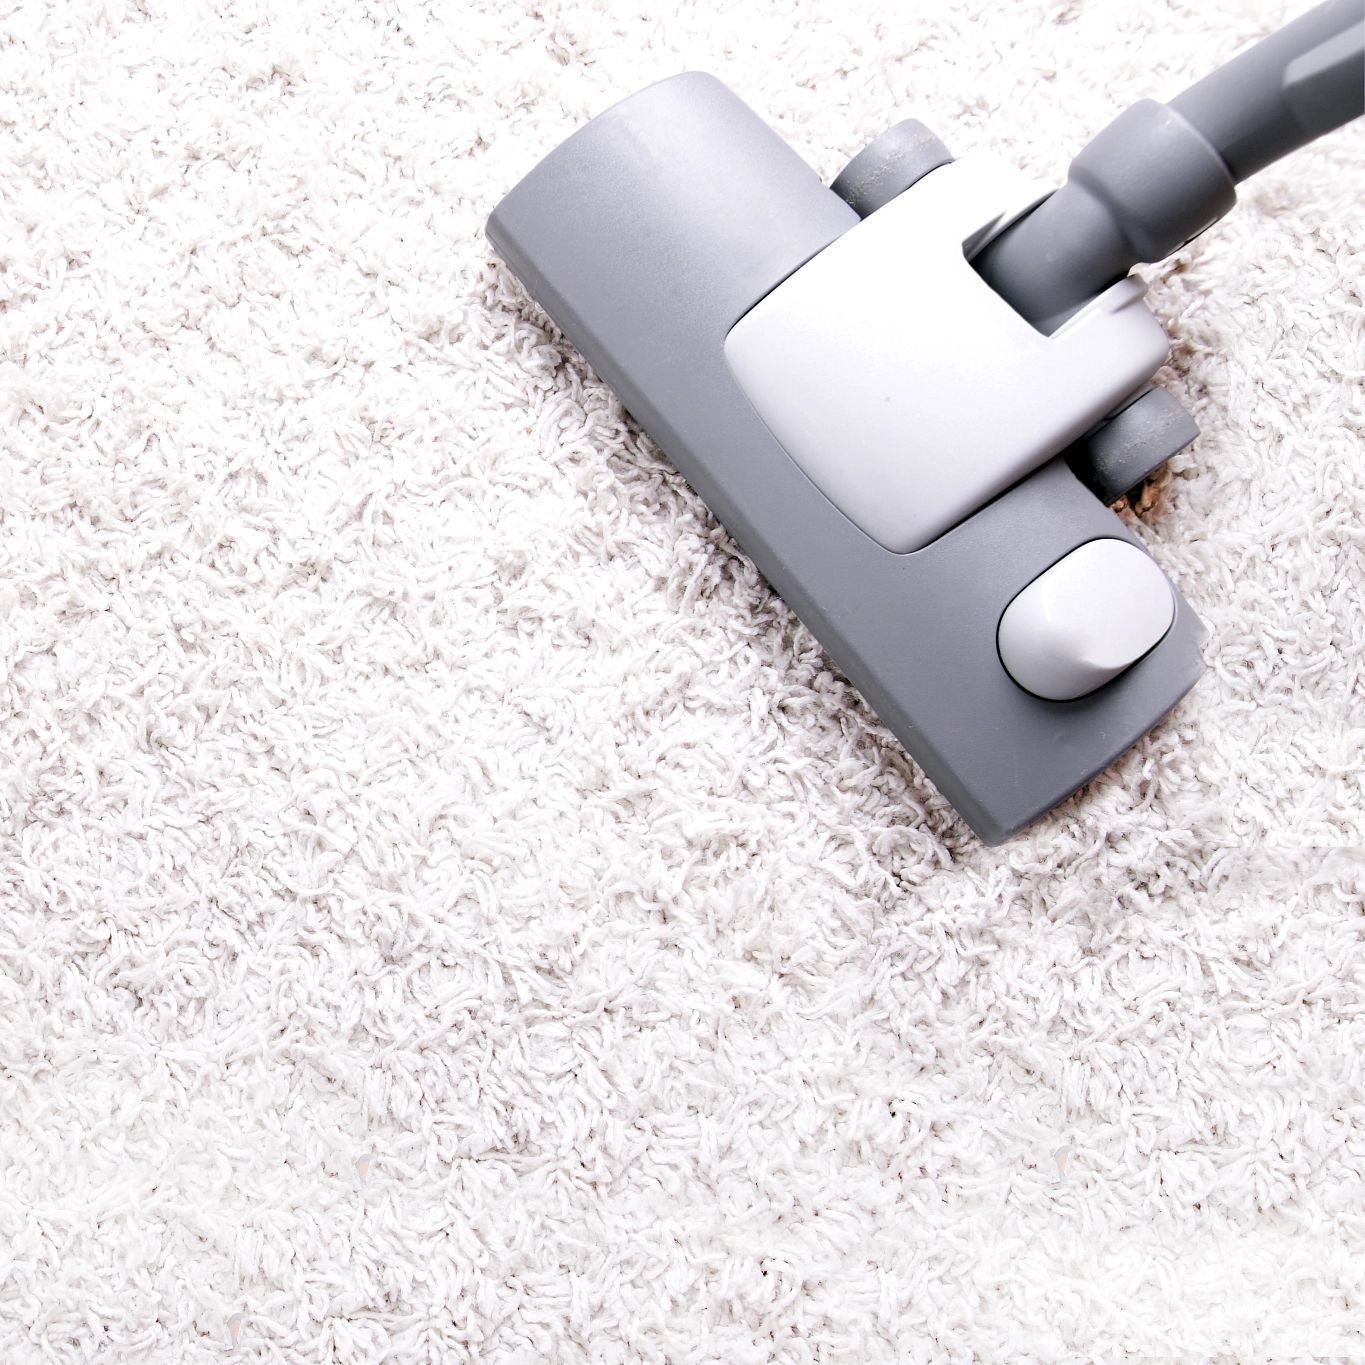 Carpet cleaner on white carpet - Professional carpet cleaning supplies and services from Perkins Carpet Co in Conroe, TX